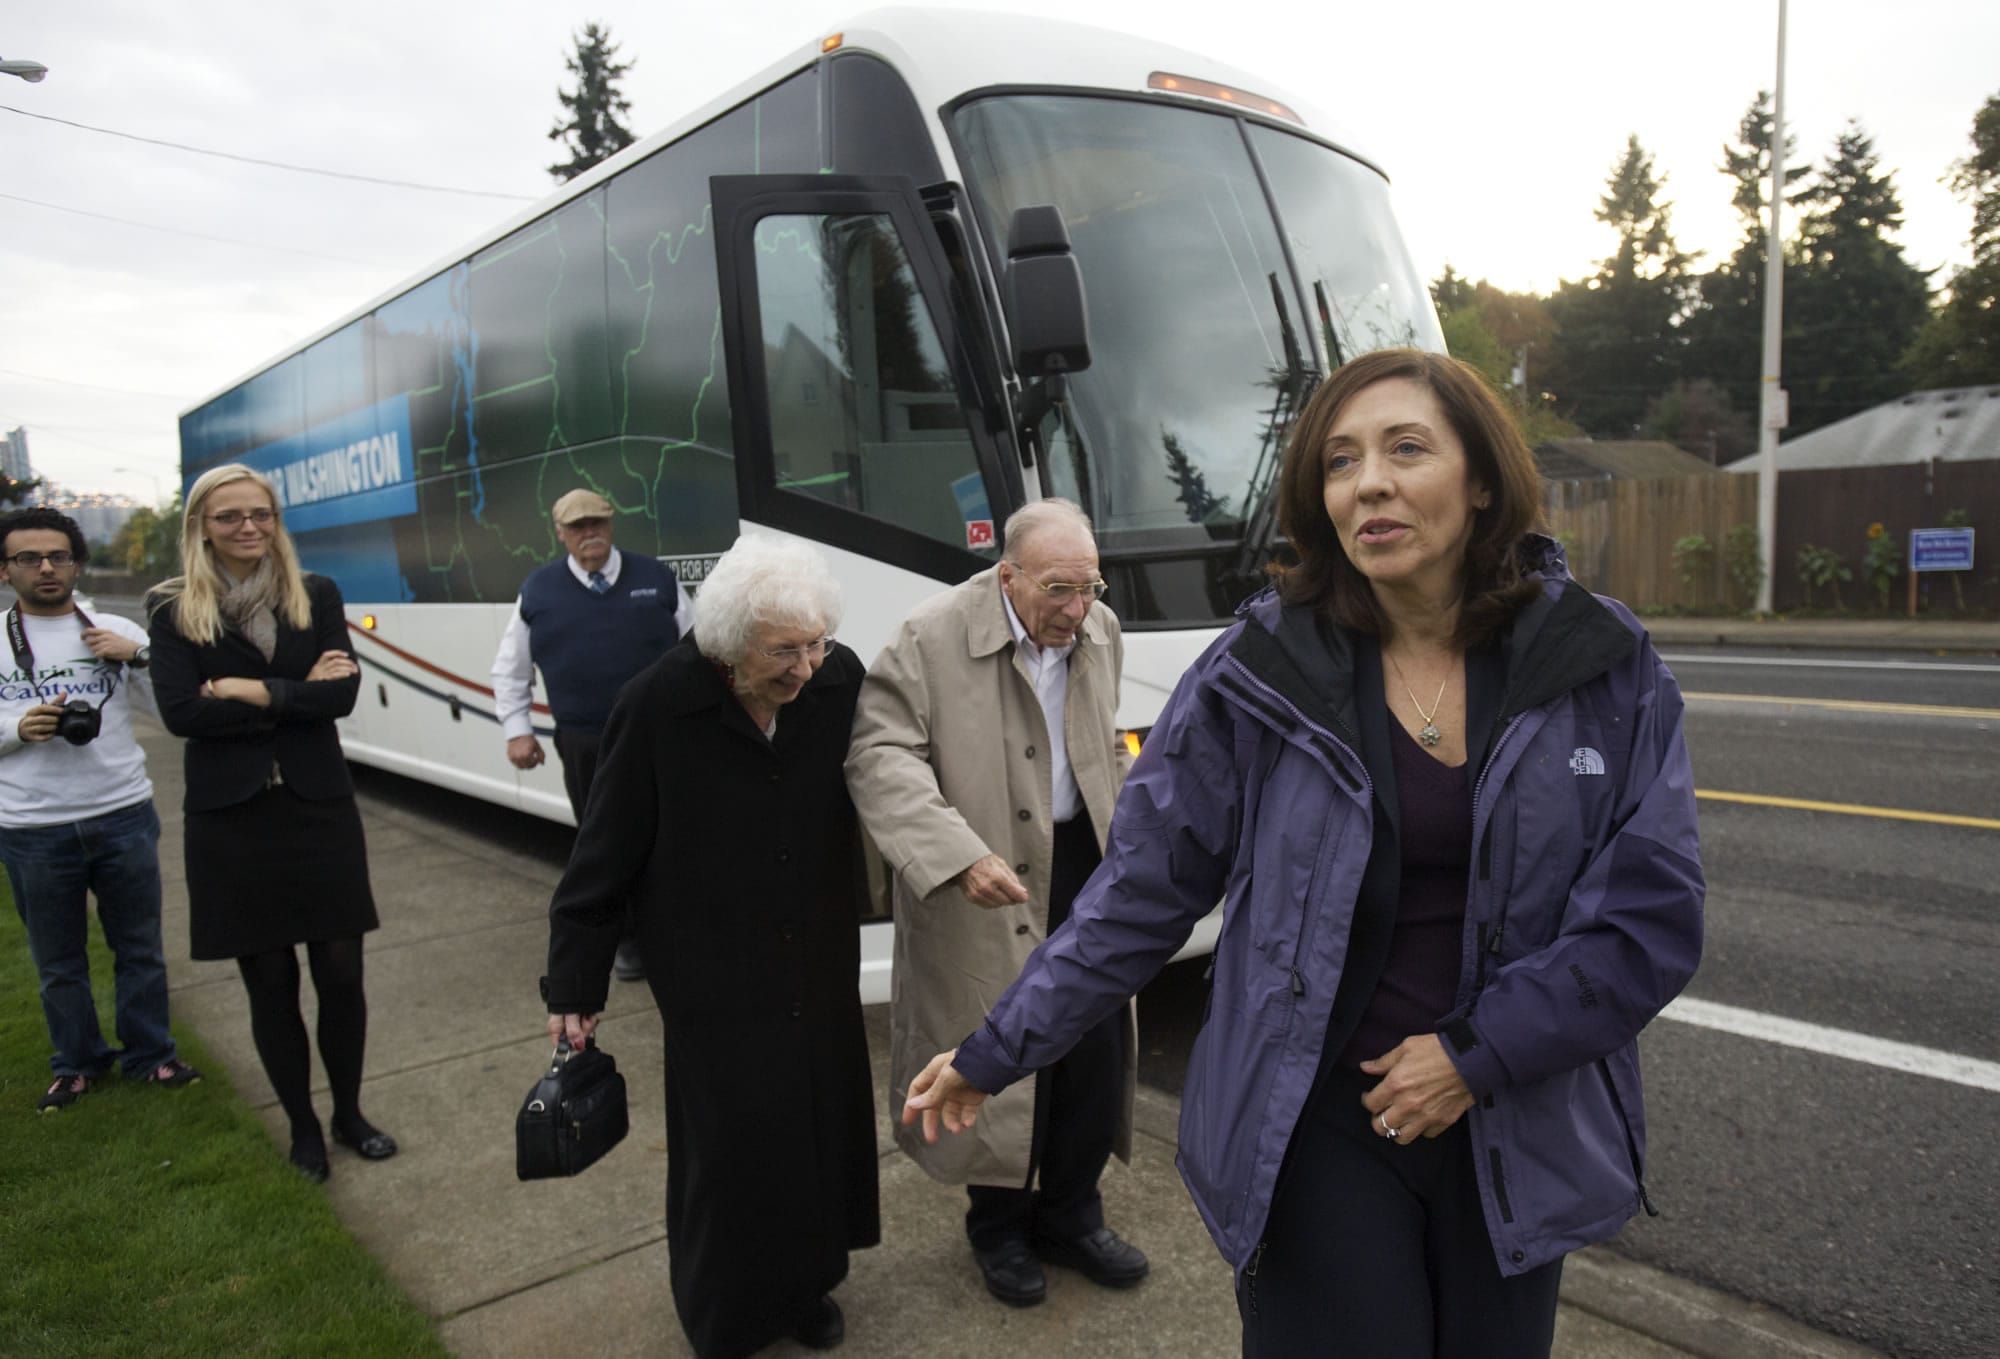 U.S. Sen. Maria Cantwell, D-Wash., makes a campaign stop at the Vancouver Firefighters Union Hall on Friday evening as former state Rep. Val Ogden and former Clark County Democratic Party Chairman Dan Ogden follow behind.